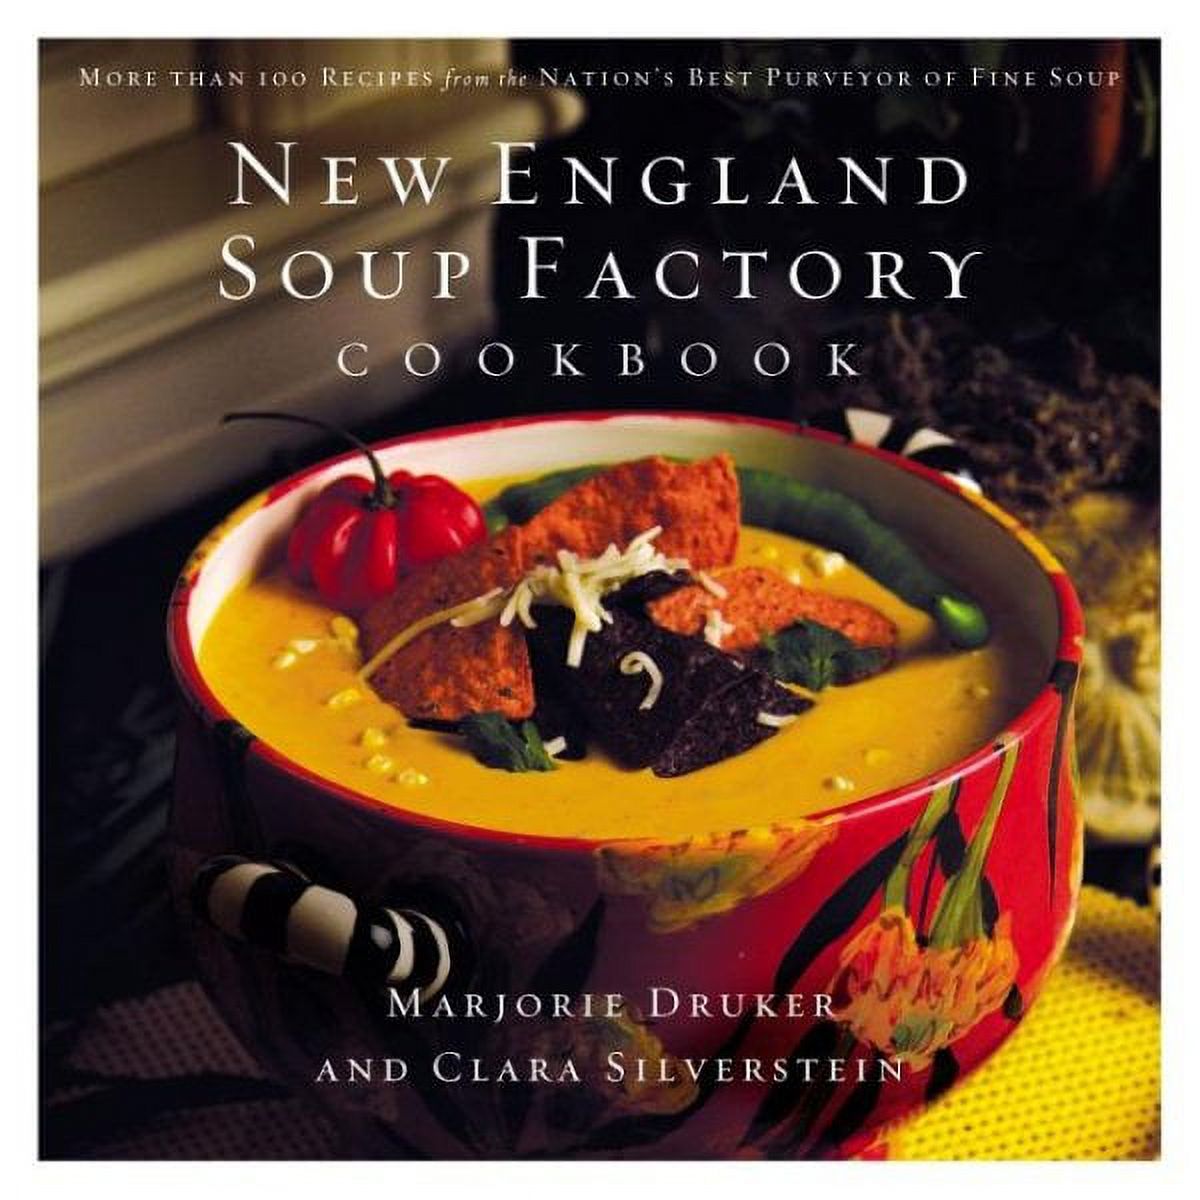 New England Soup Factory Cookbook - image 1 of 2